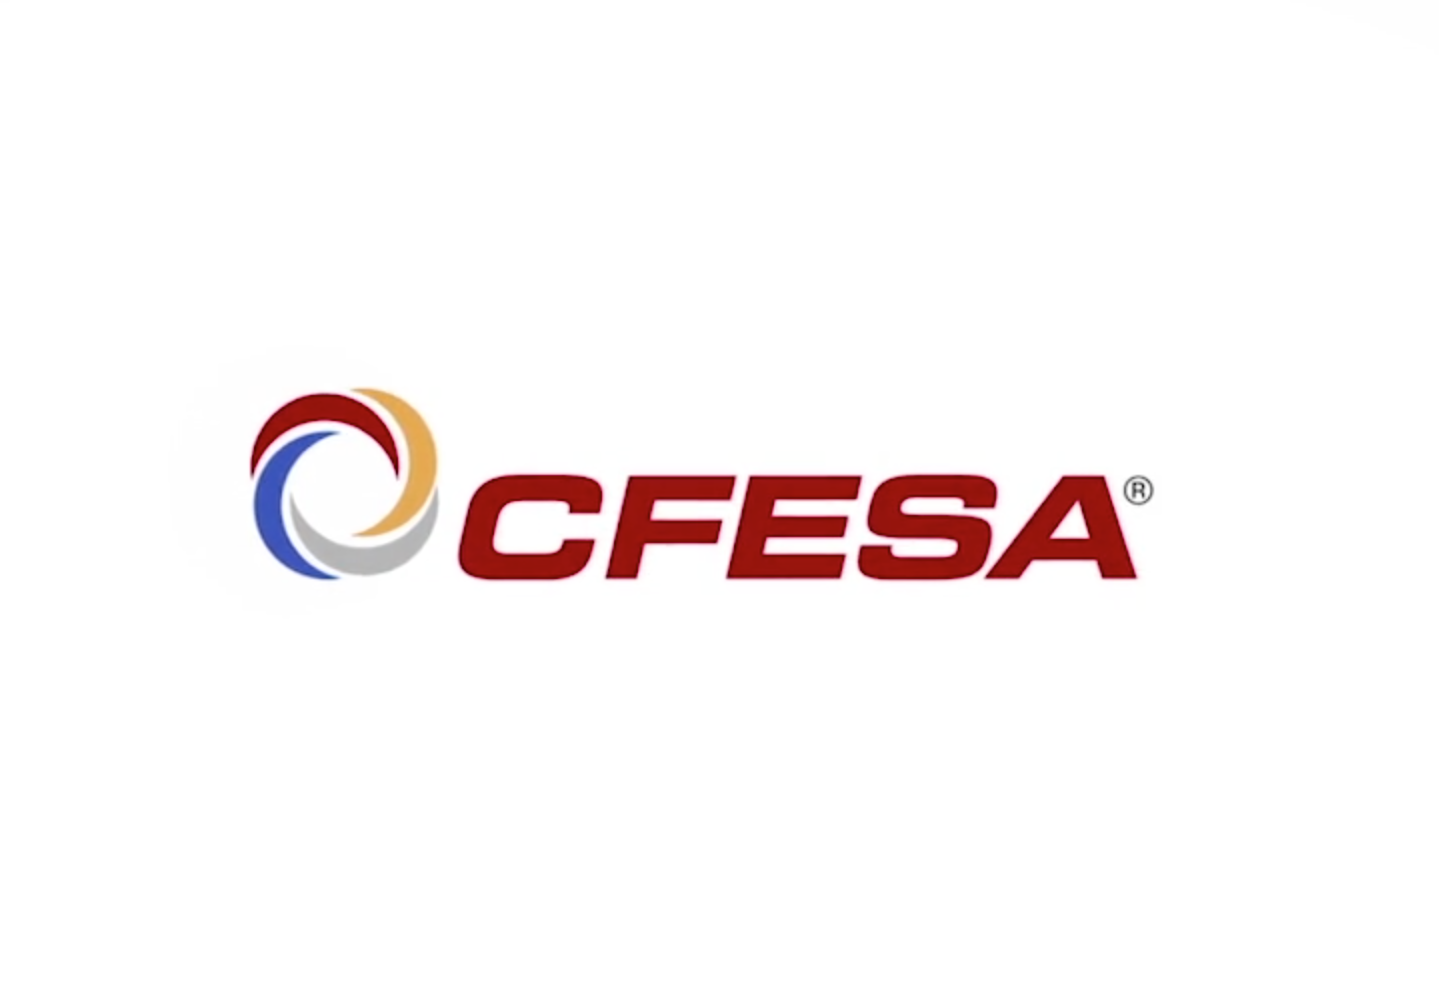 CFEST training to take place in July